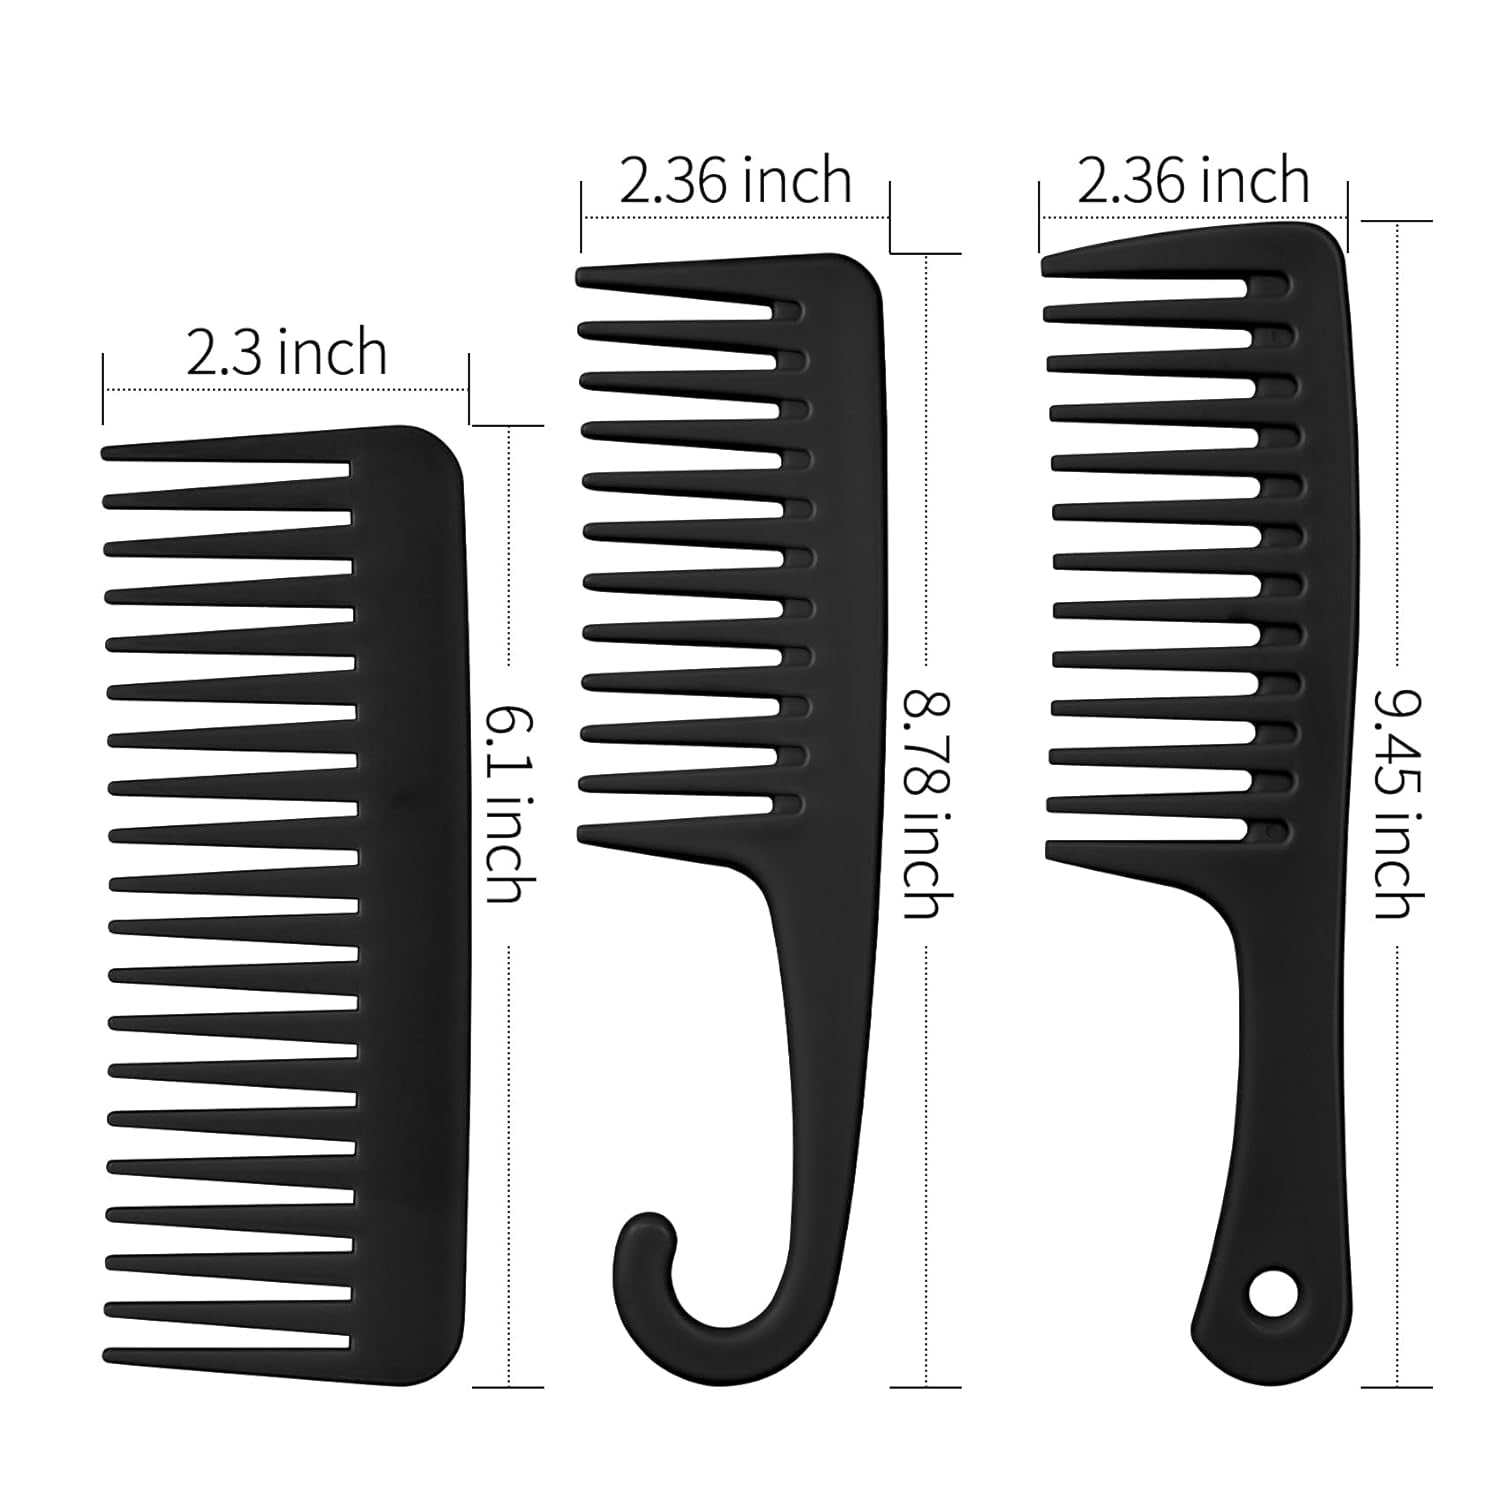 3PCS Wide Tooth Comb and Large Detangler Comb, Shower Comb with Hook,Hair Comb for Textured 3A to 4C Curly/Wet/Dry/Long/Thick Hair（Black)